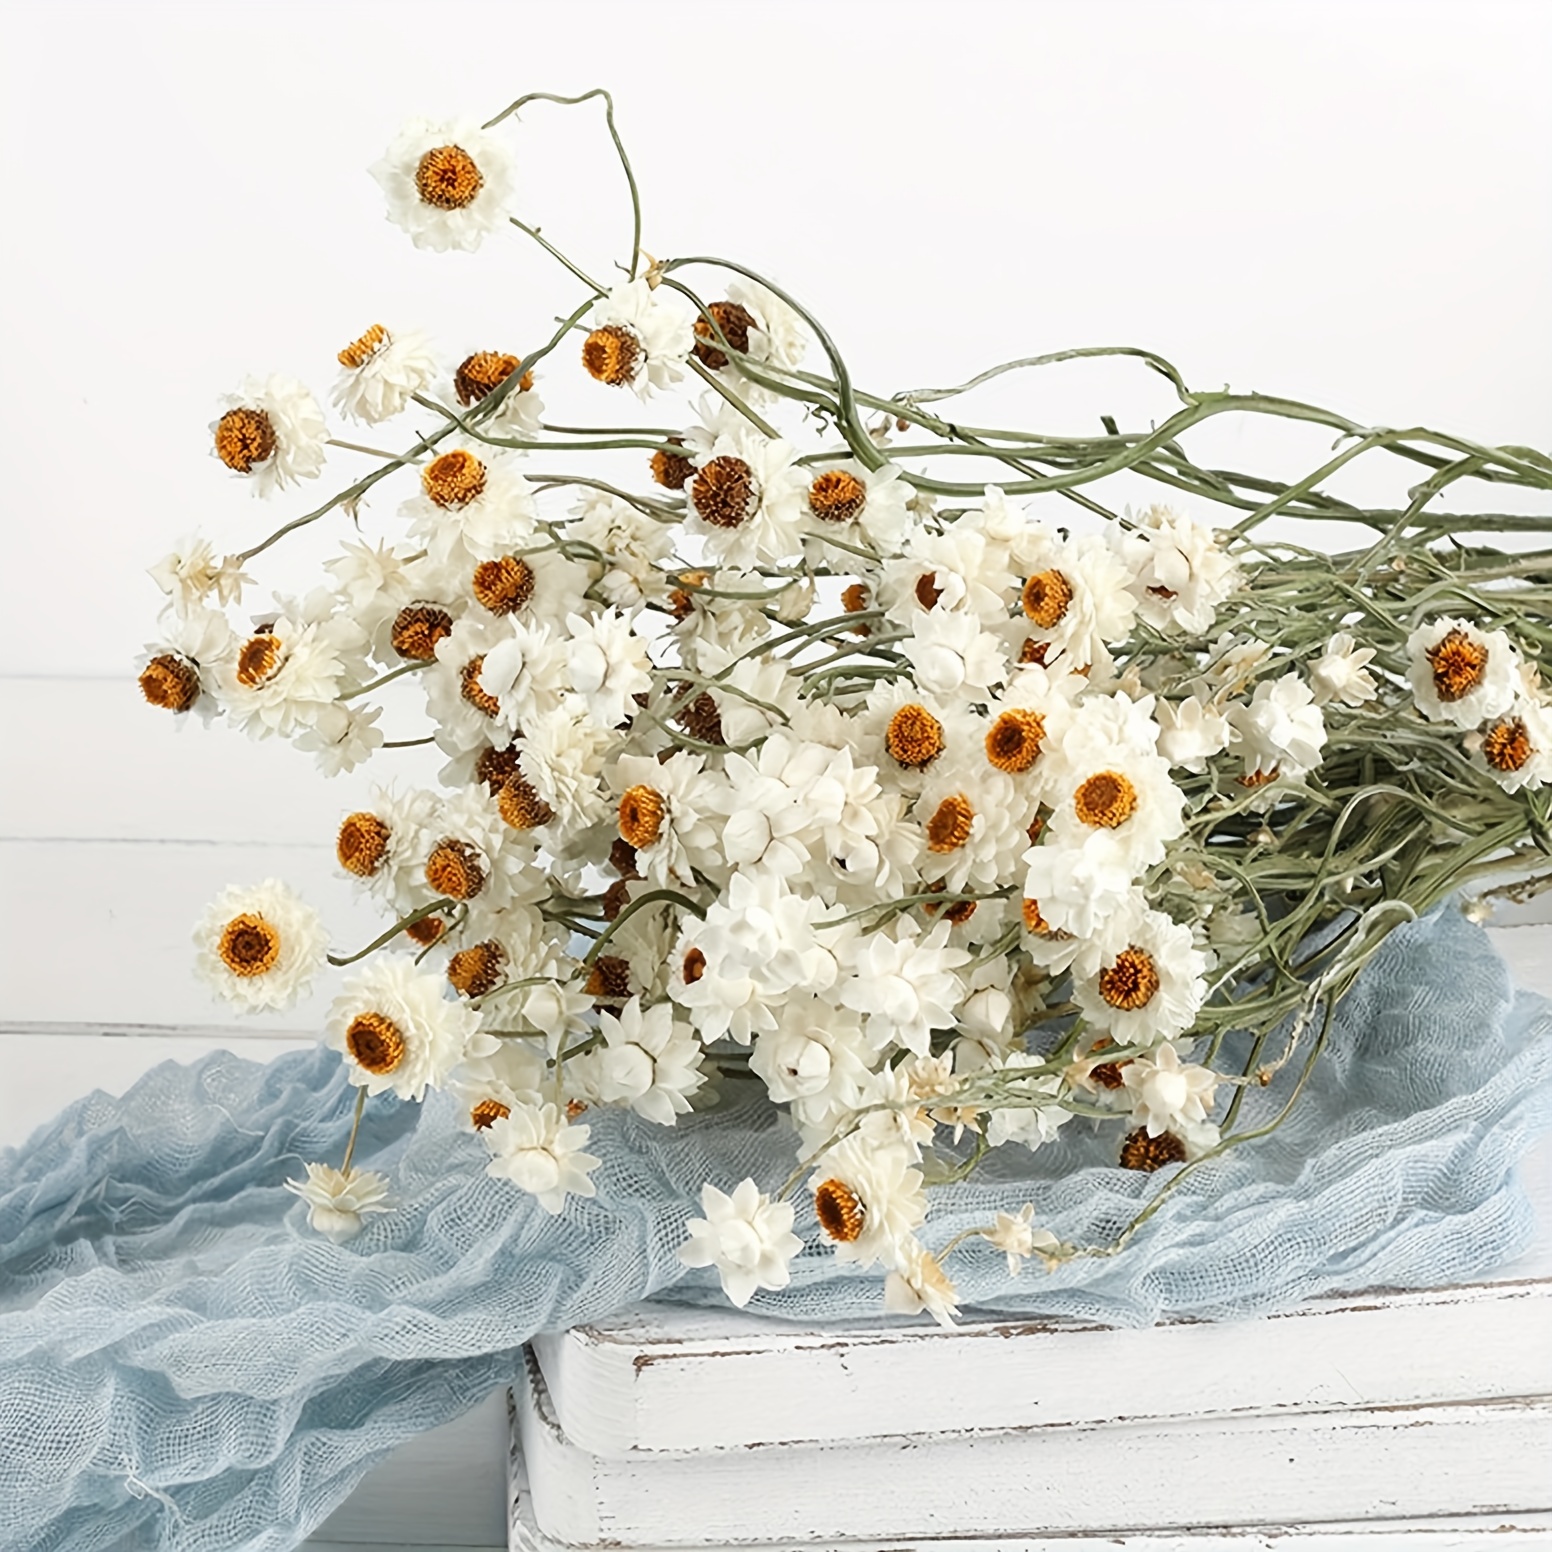 Jtoder Dried Daisy Flowers Bouquet, 200+ Real Dry White Flowers with Stems,  17'' Gerber Daisies Arrangements for Wedding, Farmhouse Vase Decorations